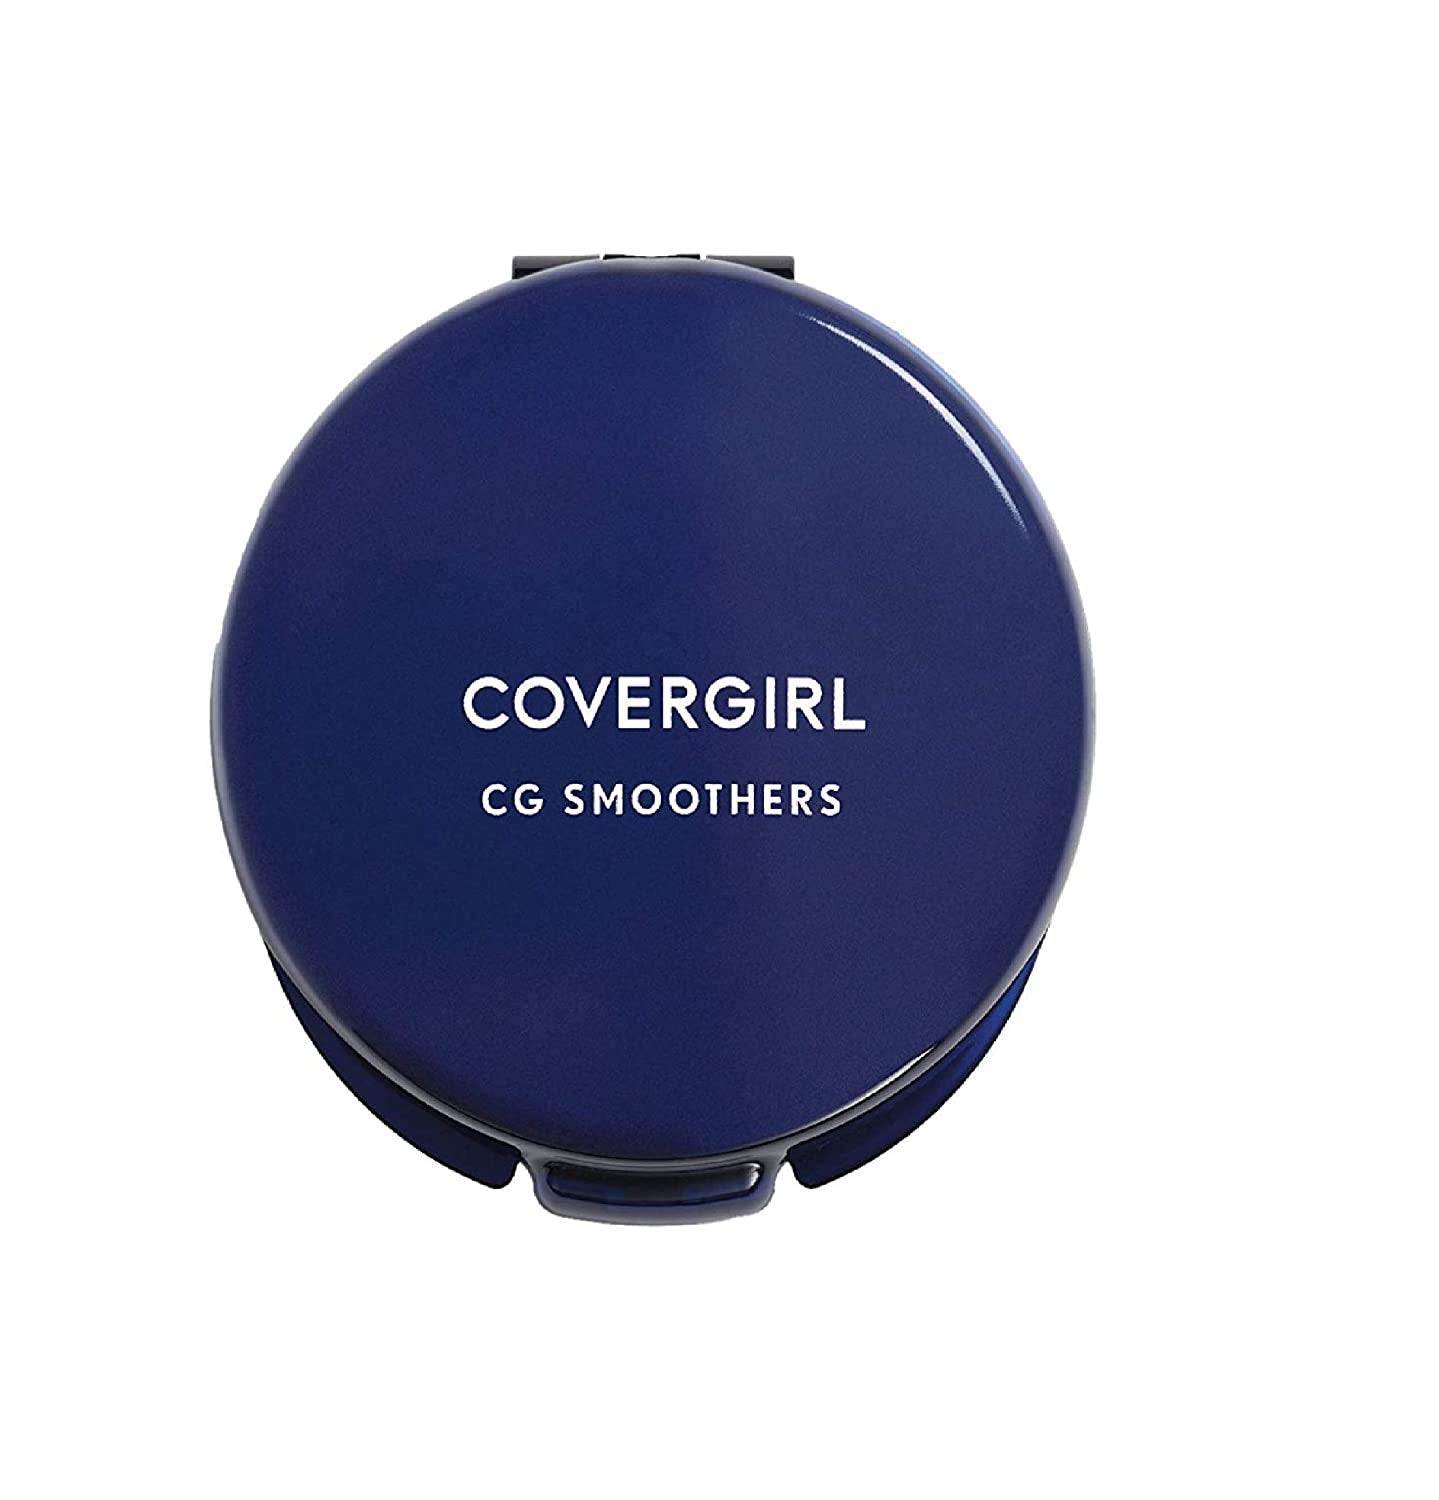 Covergirl Smoothers Pressed Powder, Translucent Light, 0.32 , Pack of 2 (Packaging May Vary)